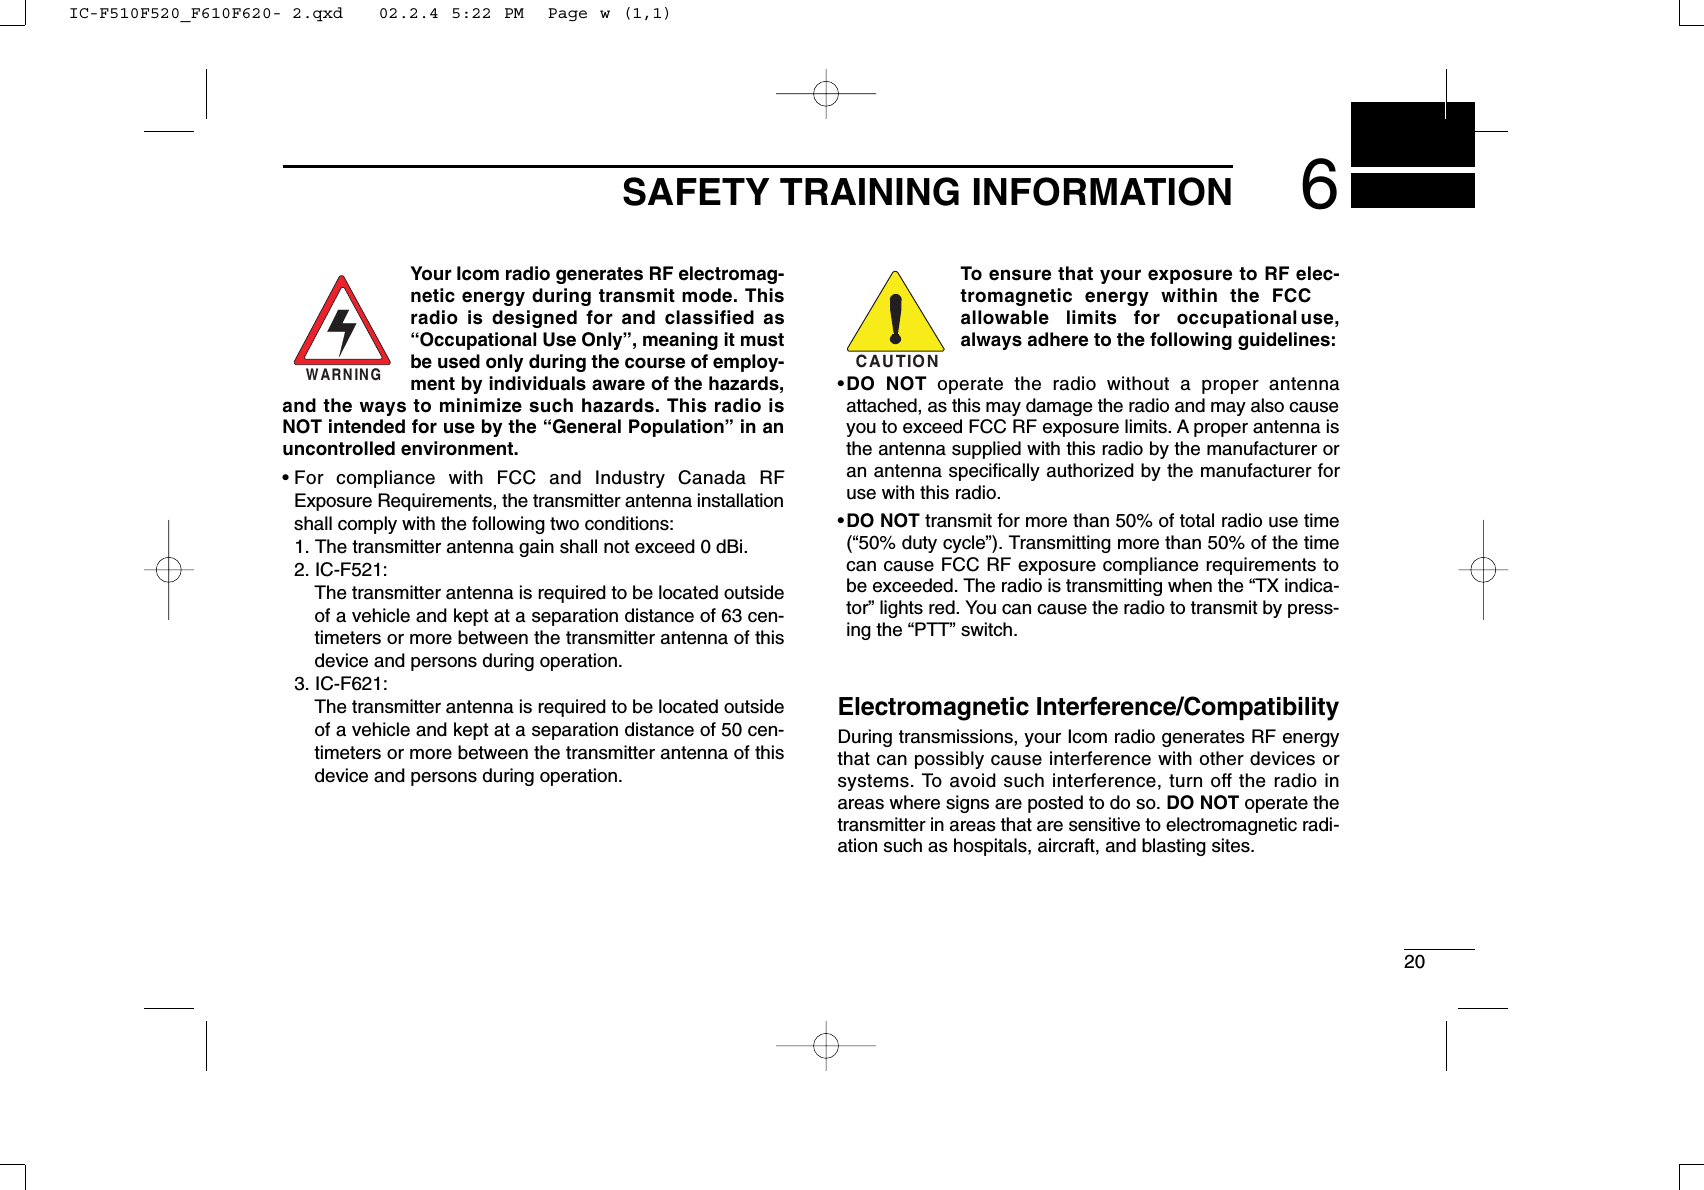 200206SAFETY TRAINING INFORMATIONYour Icom radio generates RF electromag-netic energy during transmit mode. Thisradio is designed for and classified as“Occupational Use Only”, meaning it mustbe used only during the course of employ-ment by individuals aware of the hazards,and the ways to minimize such hazards. This radio isNOT intended for use by the “General Population” in anuncontrolled environment.• For compliance with FCC and Industry Canada RFExposure Requirements, the transmitter antenna installationshall comply with the following two conditions:1. The transmitter antenna gain shall not exceed 0 dBi.2. IC-F521:The transmitter antenna is required to be located outsideof a vehicle and kept at a separation distance of 63 cen-timeters or more between the transmitter antenna of thisdevice and persons during operation.3. IC-F621:The transmitter antenna is required to be located outsideof a vehicle and kept at a separation distance of 50 cen-timeters or more between the transmitter antenna of thisdevice and persons during operation.To ensure that your exposure to RF elec-tromagnetic energy within the FCCallowable limits for occupational use,always adhere to the following guidelines:•DO NOT operate the radio without a proper antennaattached, as this may damage the radio and may also causeyou to exceed FCC RF exposure limits. A proper antenna isthe antenna supplied with this radio by the manufacturer oran antenna speciﬁcally authorized by the manufacturer foruse with this radio.•DO NOT transmit for more than 50% of total radio use time(“50% duty cycle”). Transmitting more than 50% of the timecan cause FCC RF exposure compliance requirements tobe exceeded. The radio is transmitting when the “TX indica-tor” lights red. You can cause the radio to transmit by press-ing the “PTT” switch.Electromagnetic Interference/CompatibilityDuring transmissions, your Icom radio generates RF energythat can possibly cause interference with other devices orsystems. To avoid such interference, turn off the radio inareas where signs are posted to do so. DO NOT operate thetransmitter in areas that are sensitive to electromagnetic radi-ation such as hospitals, aircraft, and blasting sites.WARNINGCAUTIONIC-F510F520_F610F620- 2.qxd   02.2.4 5:22 PM  Page w (1,1)